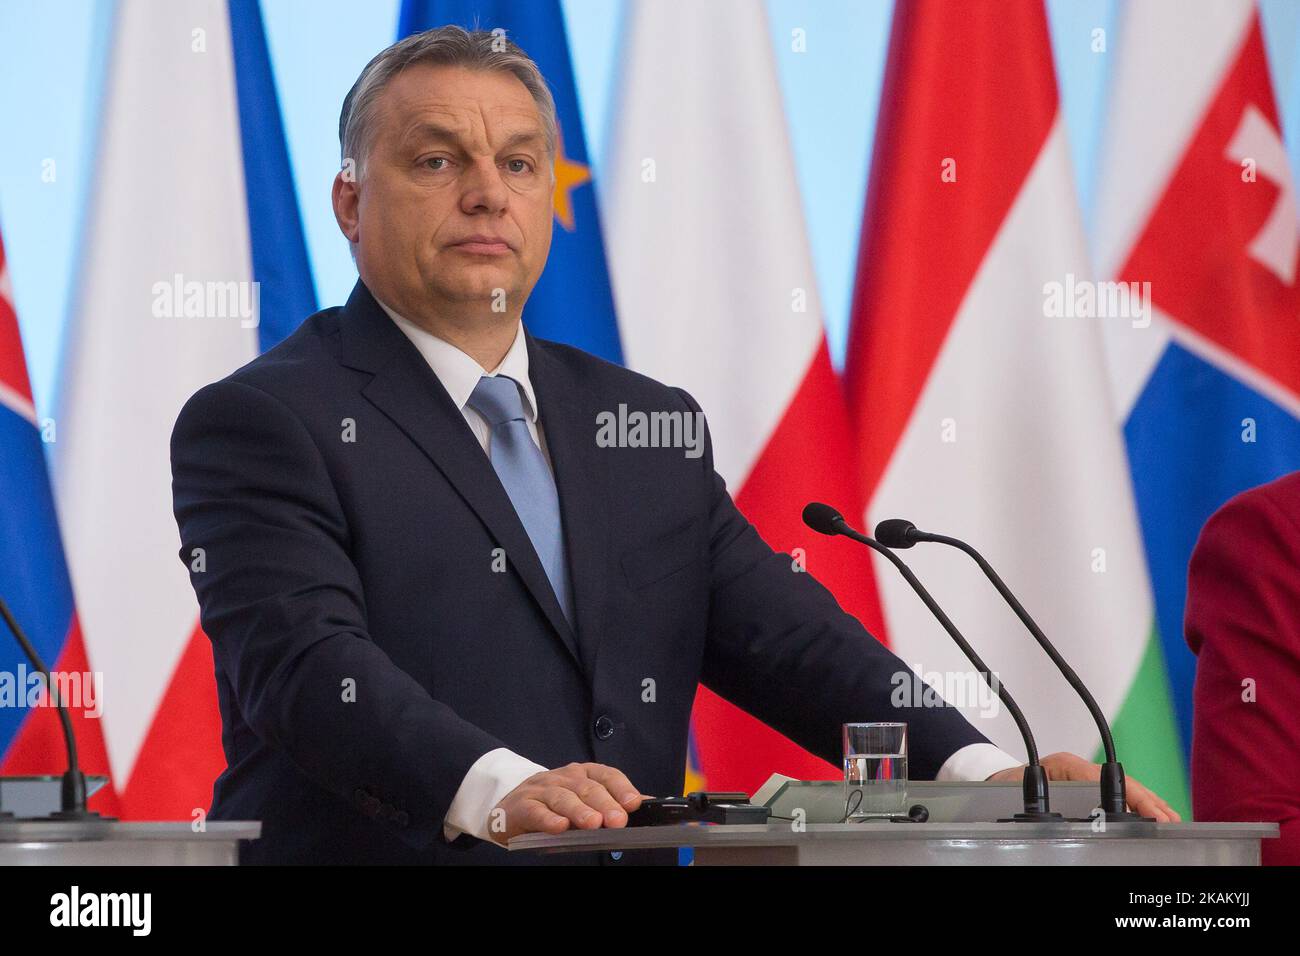 Hungary Prime Minister Viktor Orban during the Visegrad Group meeting in Warsaw, Poland on 2 March 2017 (Photo by Mateusz Wlodarczyk/NurPhoto) *** Please Use Credit from Credit Field *** Stock Photo